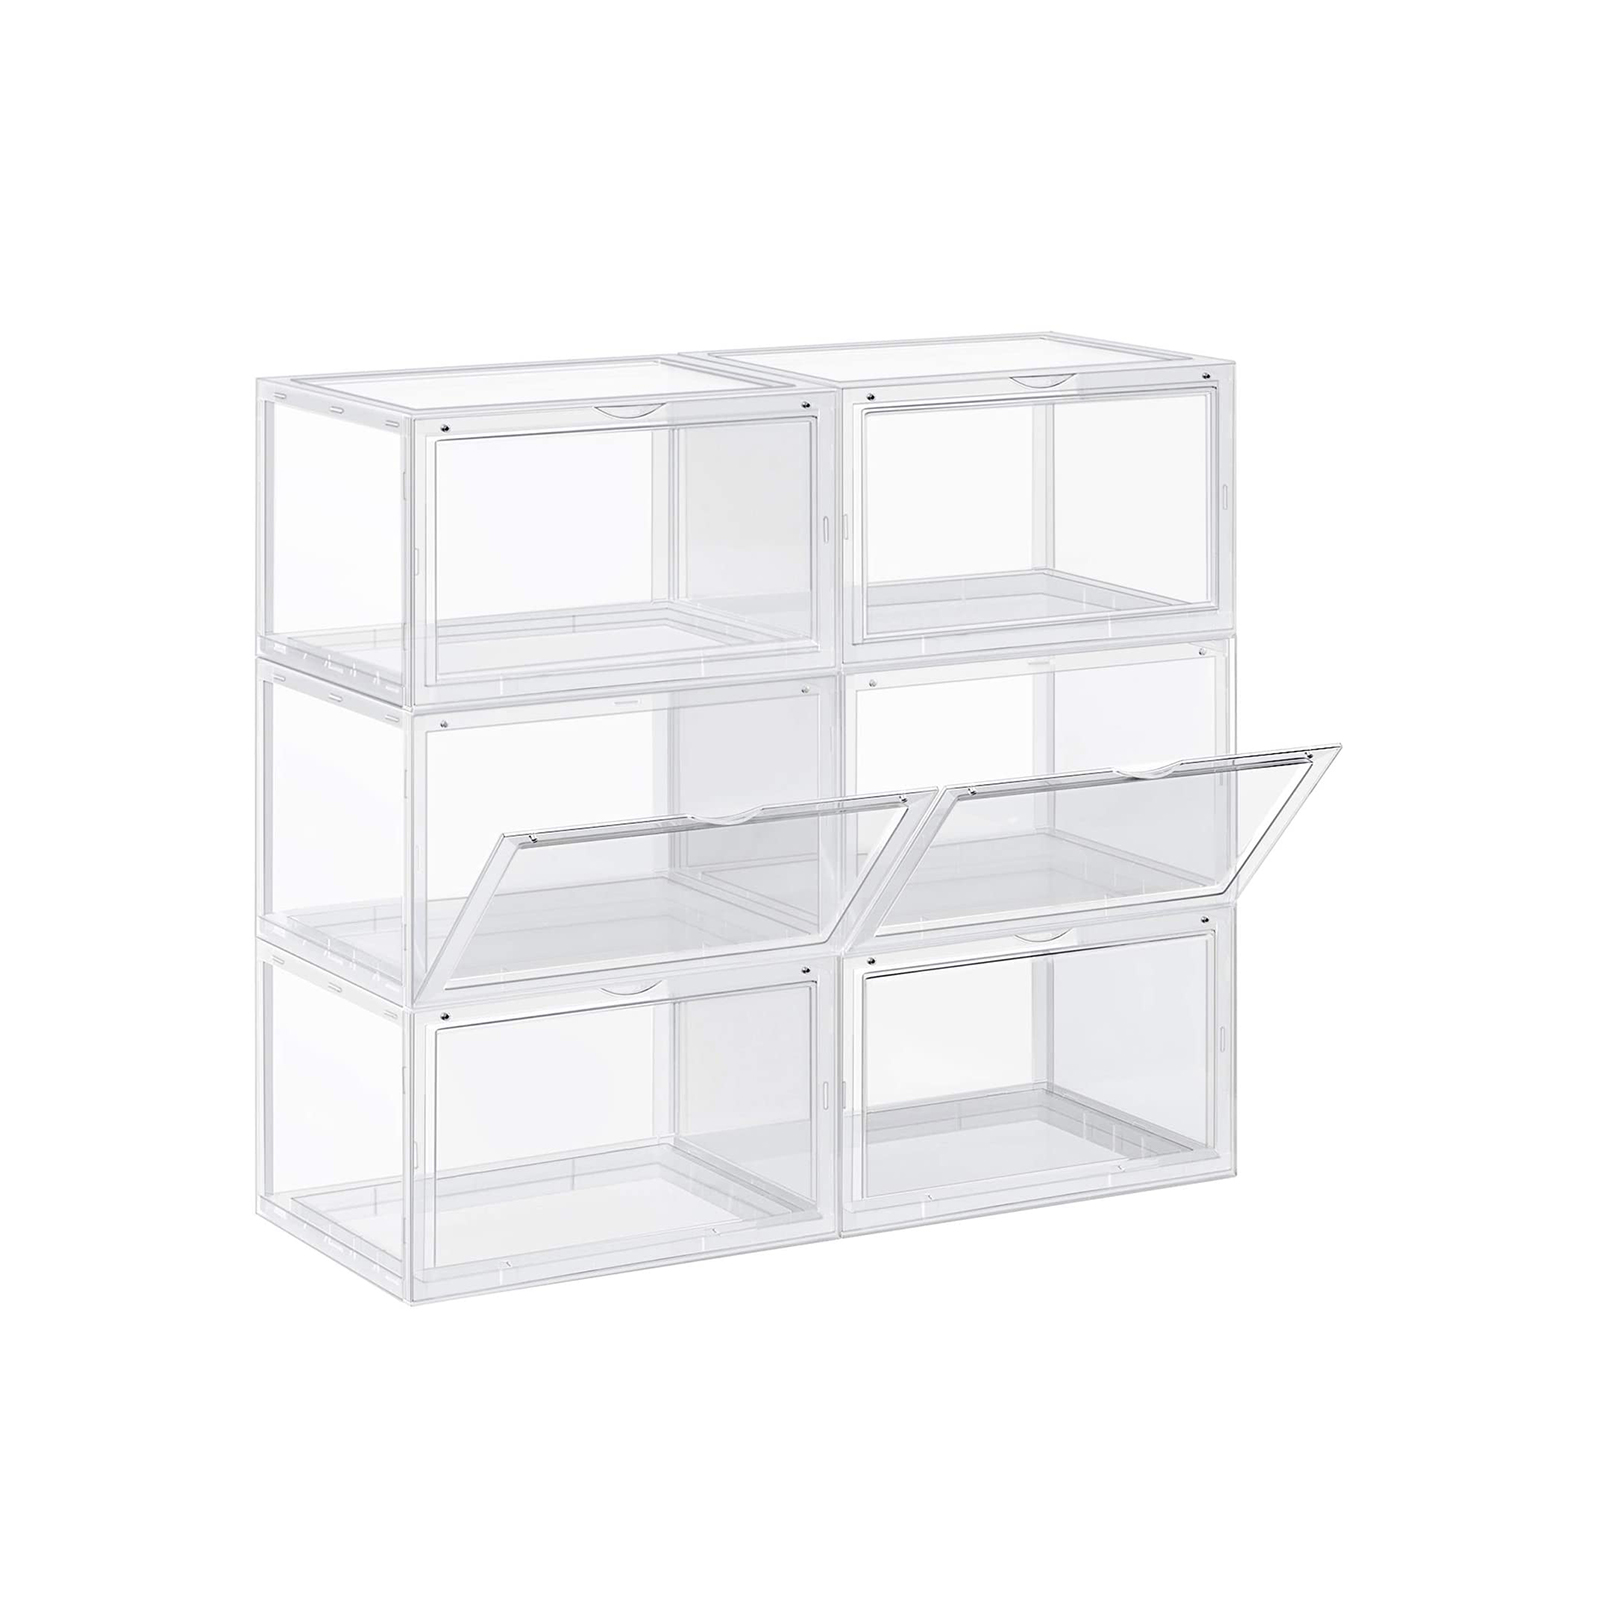 Versatile Storage Container for Shoes and Crafts SONGMICS Shoe Boxes with Lids Transparent LSP11WT Sizes Up to UK 7.5 Set of 8 Stackable Clear Shoe Organiser 